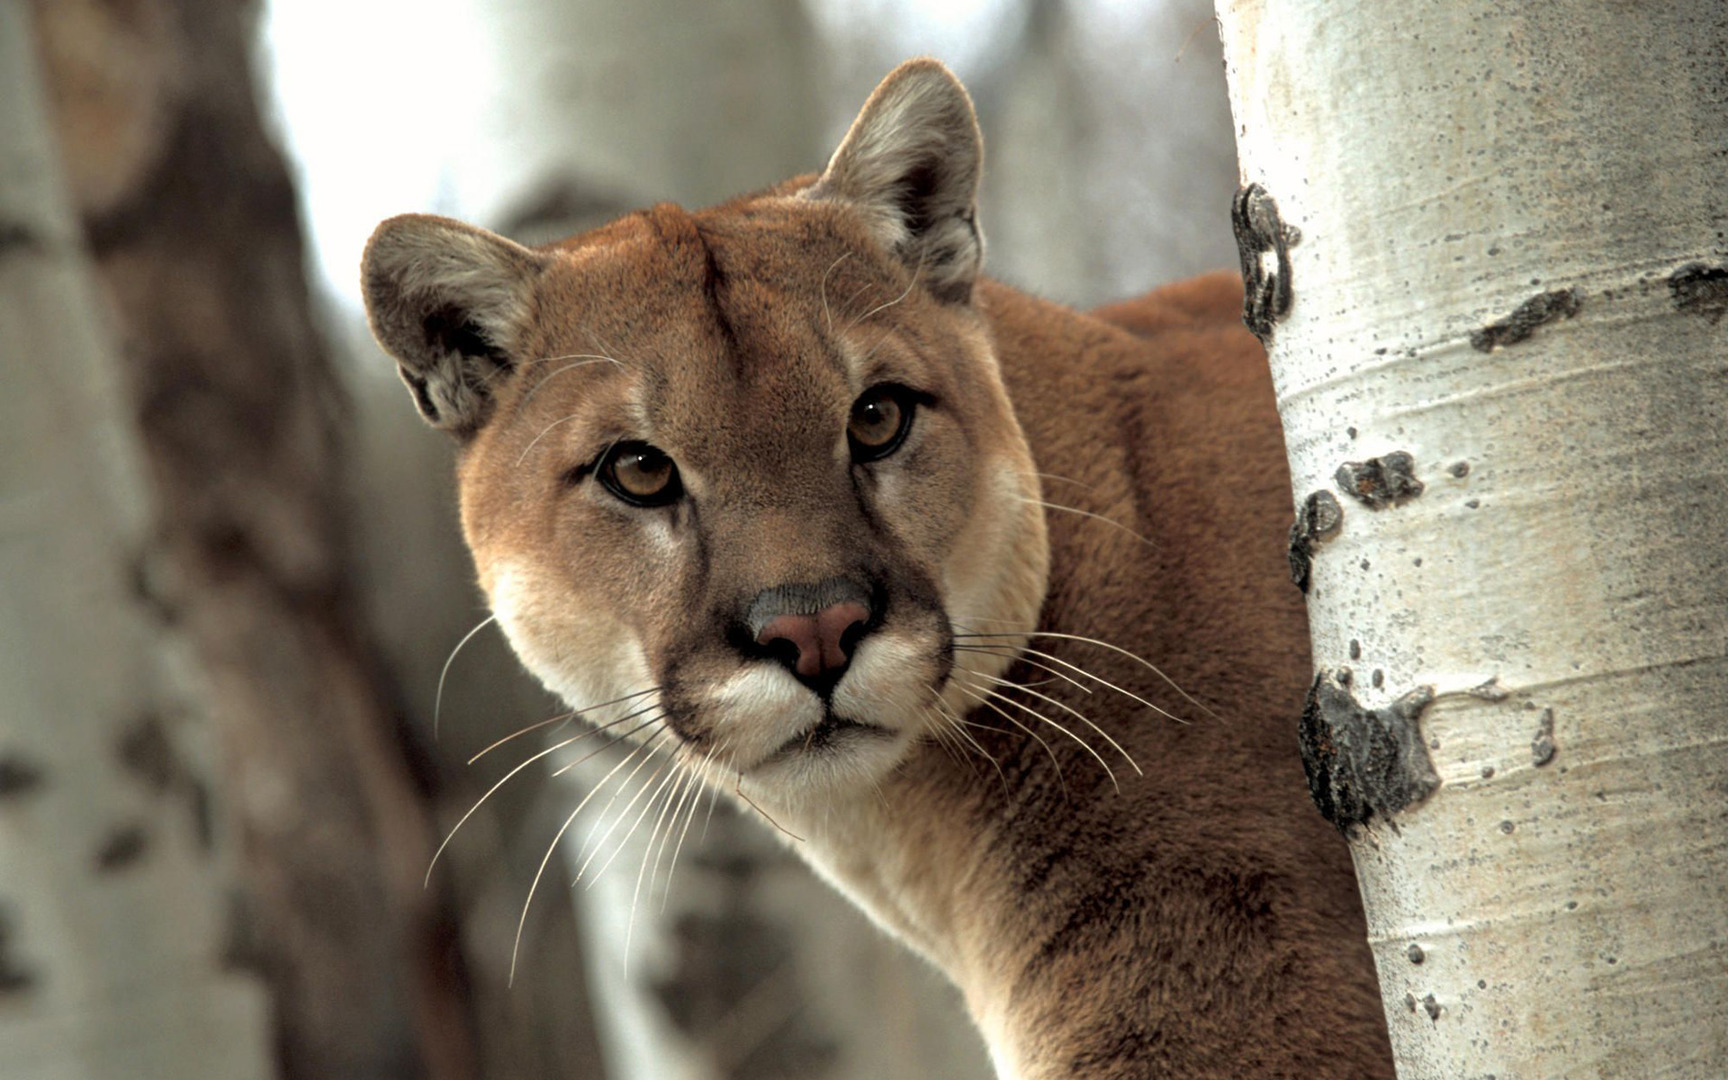 Download wallpaper 800x1200 puma mountain lion cougar iphone 4s4 for  parallax hd background